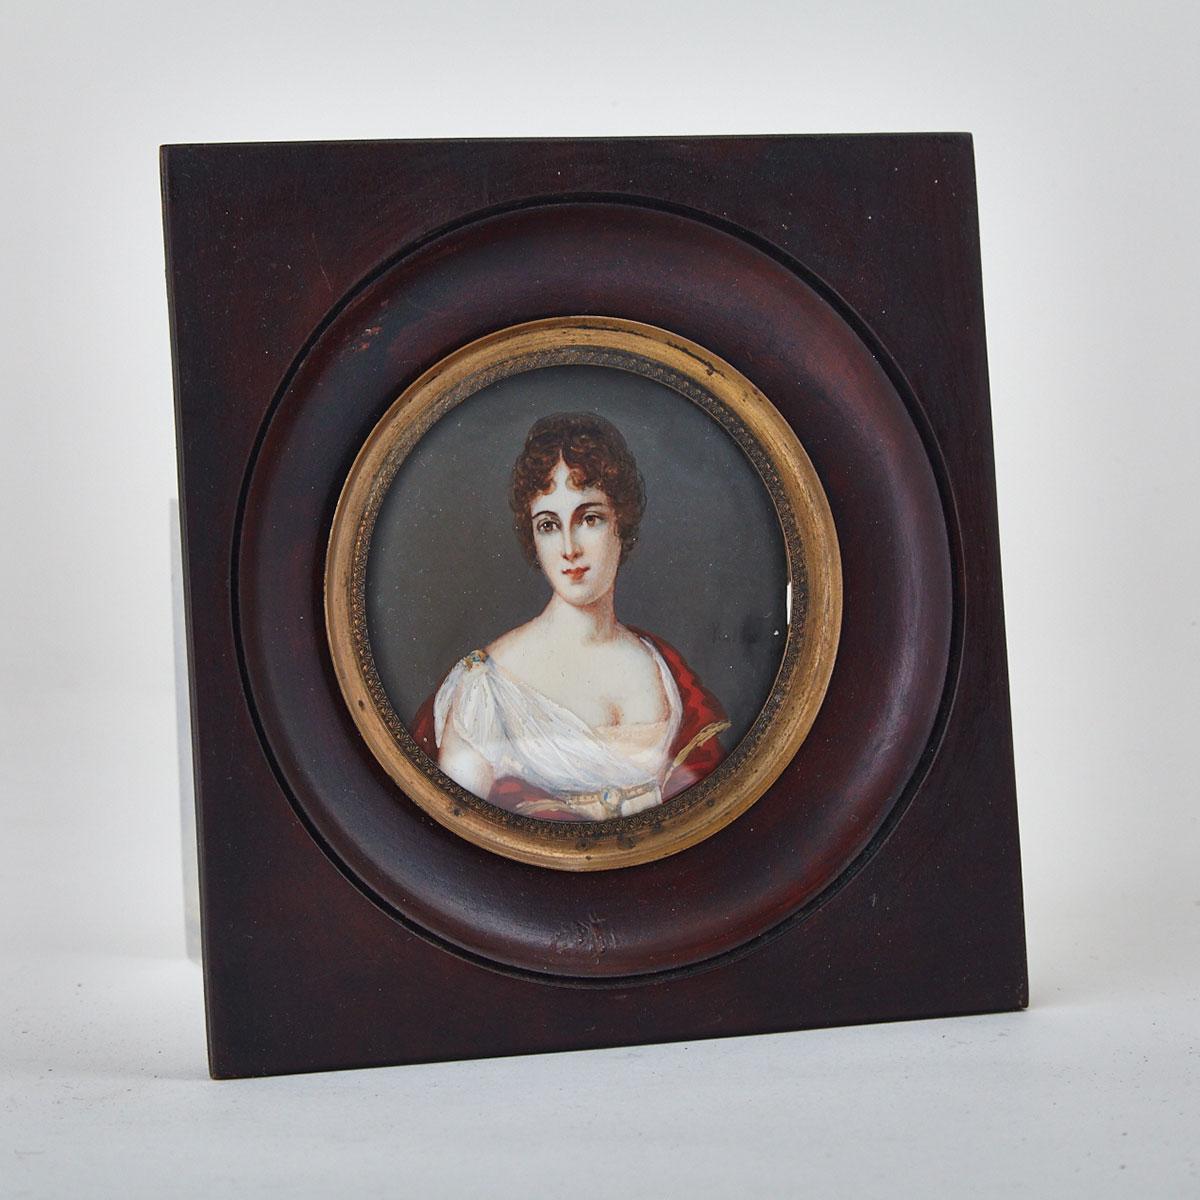 French School Portrait Miniature on Ivory of Marie-Louise of Austria, early-mid 19th century